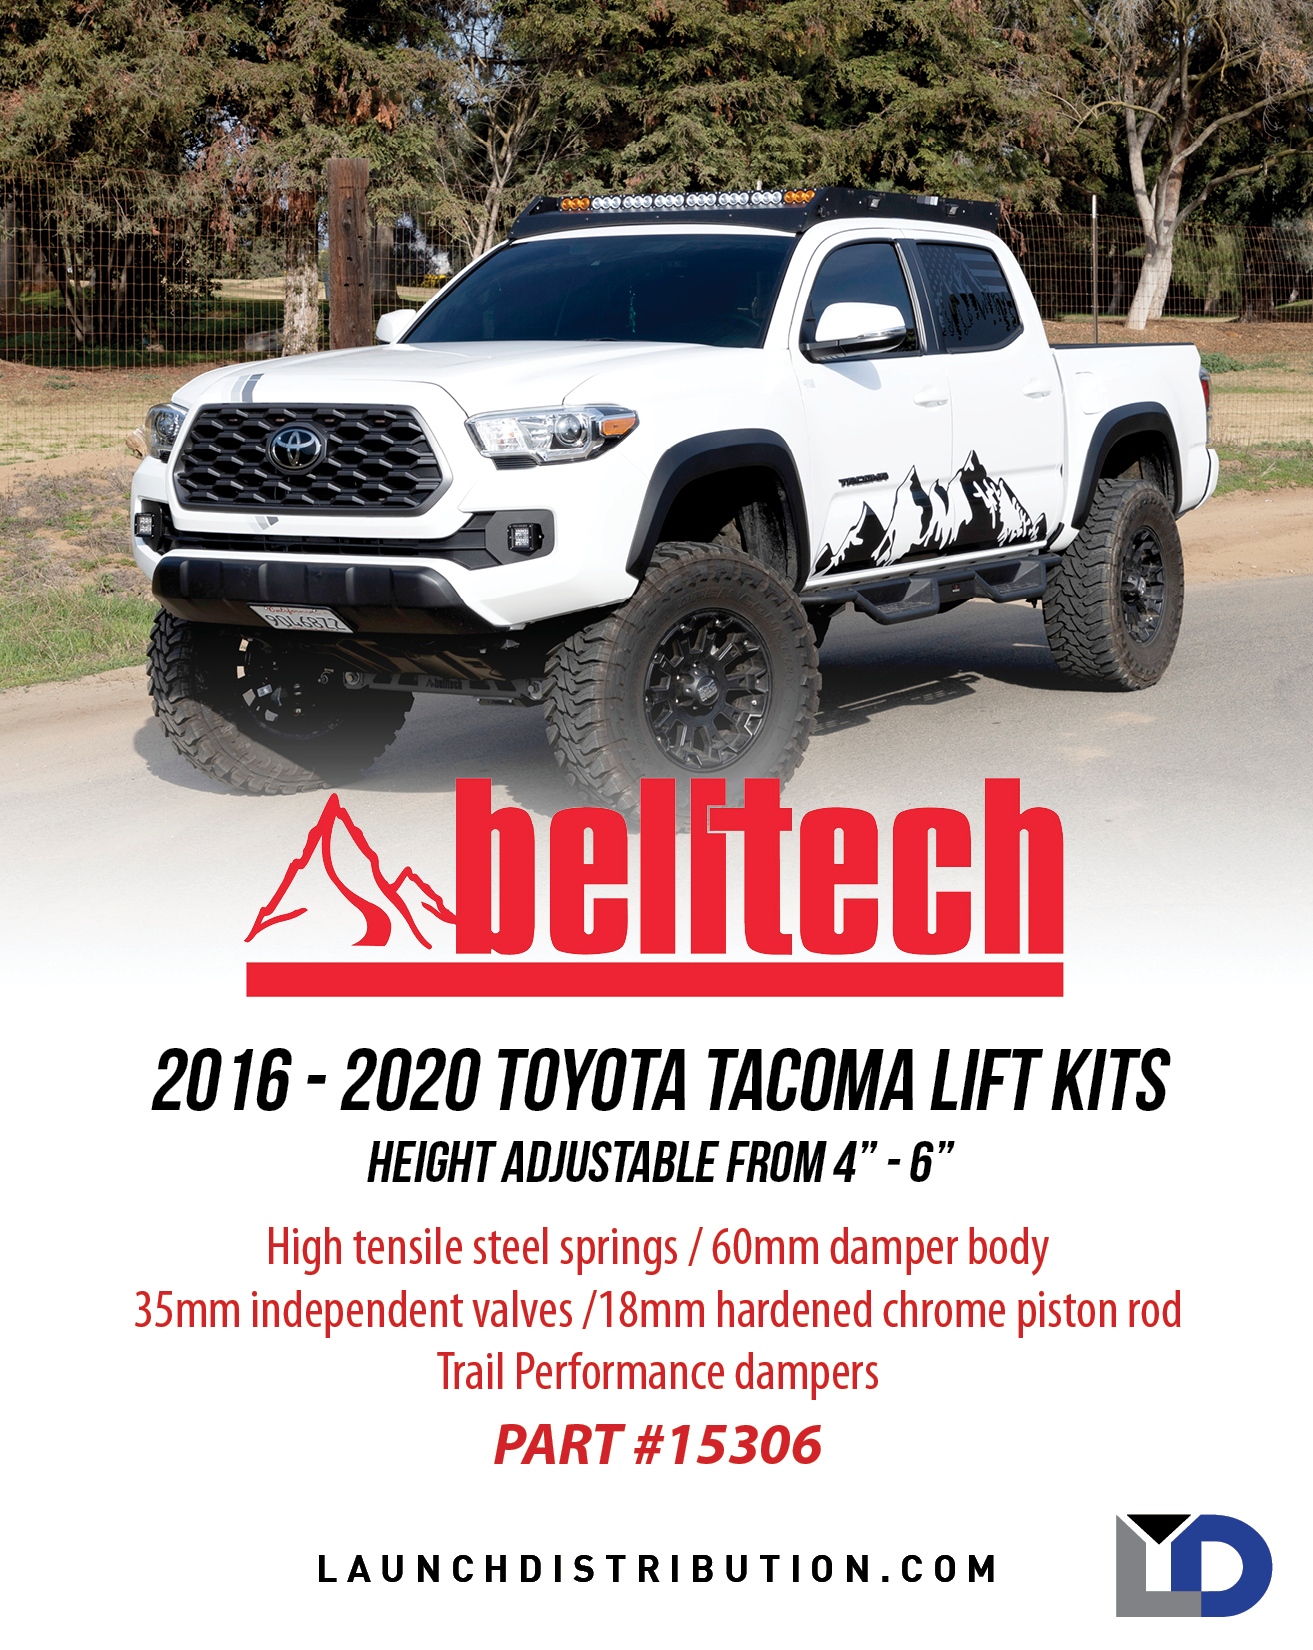 Toyota Tacoma Adjustable Lift Kits from Belltech